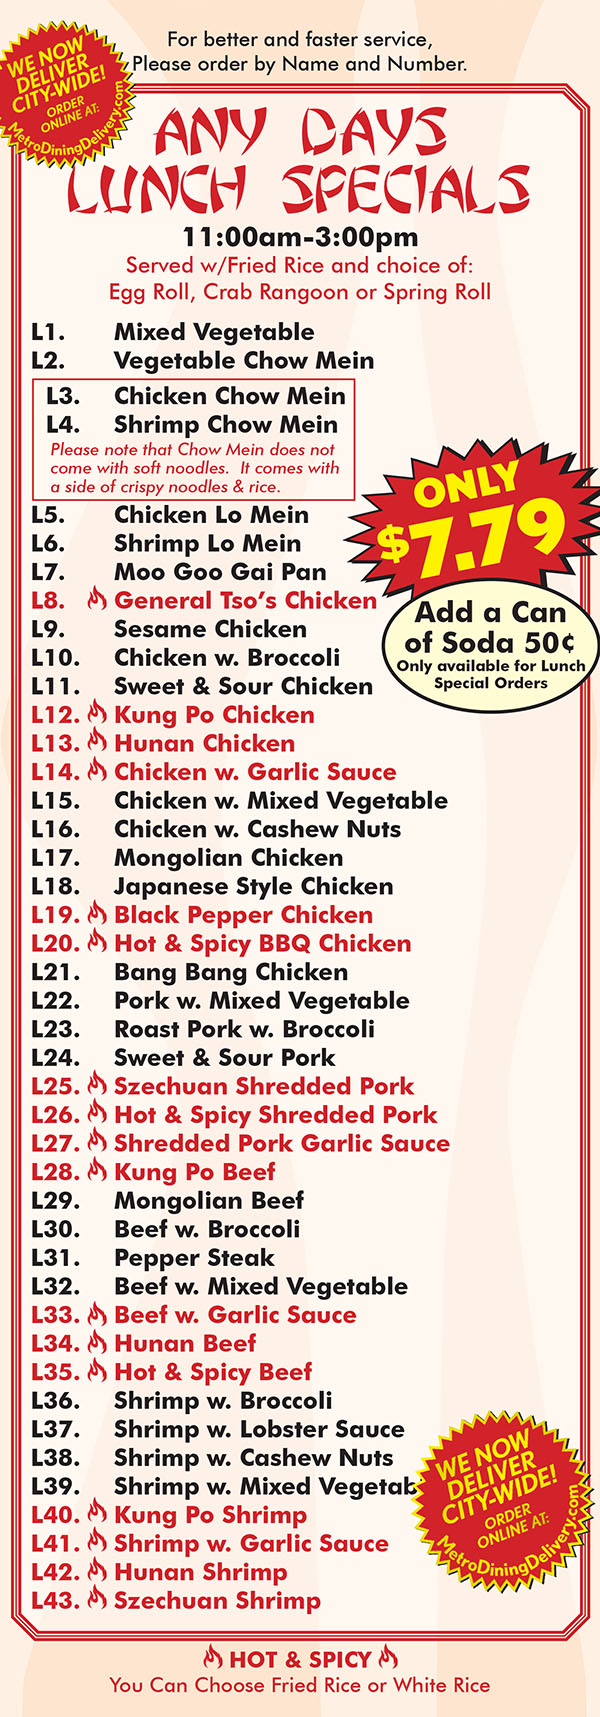 Ming's House Chinese Restaurant Menu Page 6
Any Days Lunch Special
11:00am-3:0opm
Served w/Fricd Rice and choice of:
Egg Roll, Crab Rangoon or Spring Roll
L'I . Mixed Vegetable
L2. Vegetable Chow Mein
L3. Chicken Chow Mein
L4. Shrimp Chow Me in ON“
L5. Chicken Lo Mein $5 79
L6. Shrimp Lo Mein
L7. Moo Goo Gai Pan
L8. \ General Tso’s Chicken
L9. Sesame Chicken Soda lncuded
L1 0. Chicken w. Broccoli Din. in 8. Carry out
L1 1 . Sweet & Sour Chicken Only!
L12. \ Kung Po Chicken
Ll3. \ Hunan Chicken
L1 4. \ Chicken w. Garlic Sauce
L1 5. Chicken w. Mixed Vegetable
L1 6. Chicken w. Cashew Nuts
L1 7. Mongolian Chicken
L18. Japanese Style Chicken
L1 9. \ Black Pepper Chicken
L20. \ Hot & Spicy BBQ Chicken
L2'l . Bang Bang Chicken
L22. Pork w. Mixed Vegetable
L23. Roast Pork w. Broccoli
L24. Sweet & Sour Pork
L25. \ Szechuan Shredded Pork
L26. \ Hot & Spicy Shredded Pork
L27. \ Shredded Pork Garlic Sauce
L28. \ Kung Po Beef
L29. Mongolian Beef
L30. Beef w. Broccoli
L3l . Pepper Steak
L32. Beef w. Mixed Vegetable
L33. \ Beef w. Garlic Sauce
L34. \ Hunan Beef
L35. \ Hot & Spicy Beef
L36. Shrimp w. Broccoli
L37. Shrimp w. Lobster Sauce
L38. Shrimp w. Cashew Nuts
L39. Shrimp w. Mixed Vegetable
L40. \ Kung Po Shrimp
L4l . \ Shrimp w. Garlic Sauce
L42. \ Hunan Shrimp
L43. \ Szechuan Shrimp
We Now Deliver City-Wide!
grcller
e ax
Eat DMETRO
DELIVERY“...
Restaurant Delivery Servuce
NOW ORDER ONLINE'